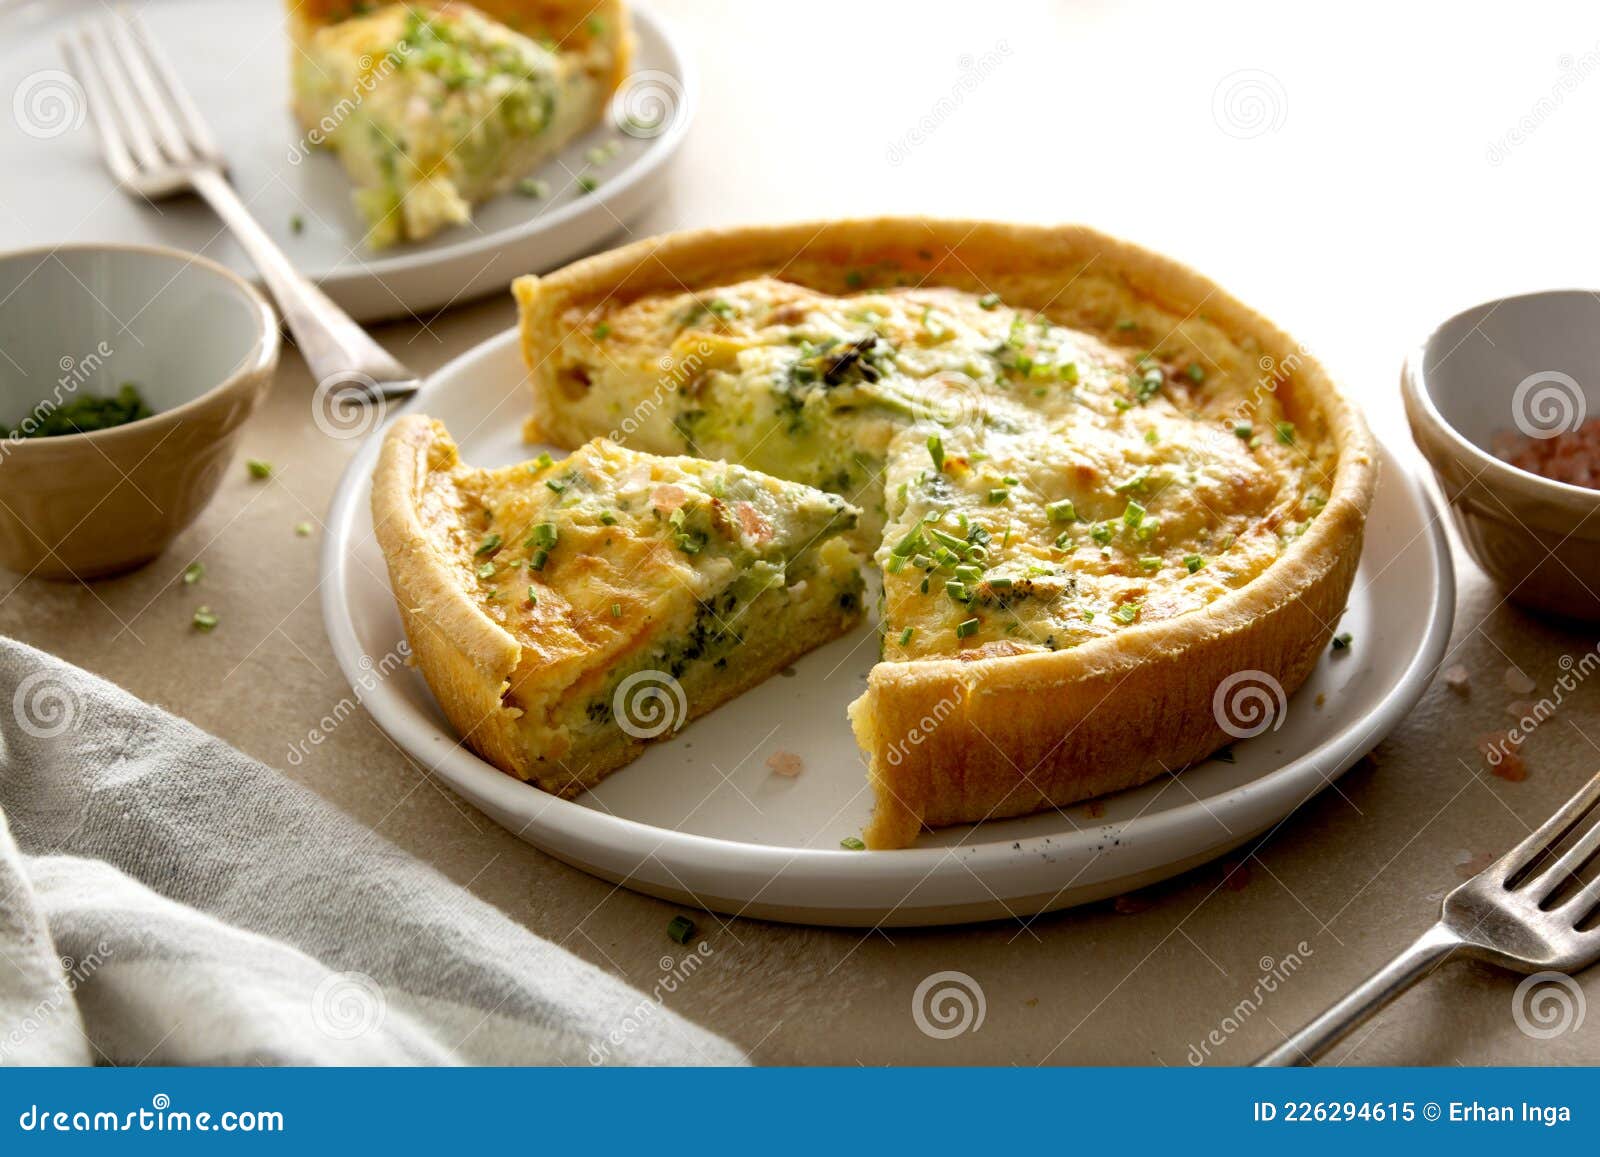 Quiches Lorraine Pie with Bacon and Spinach. Top View Home Baked Pastry ...